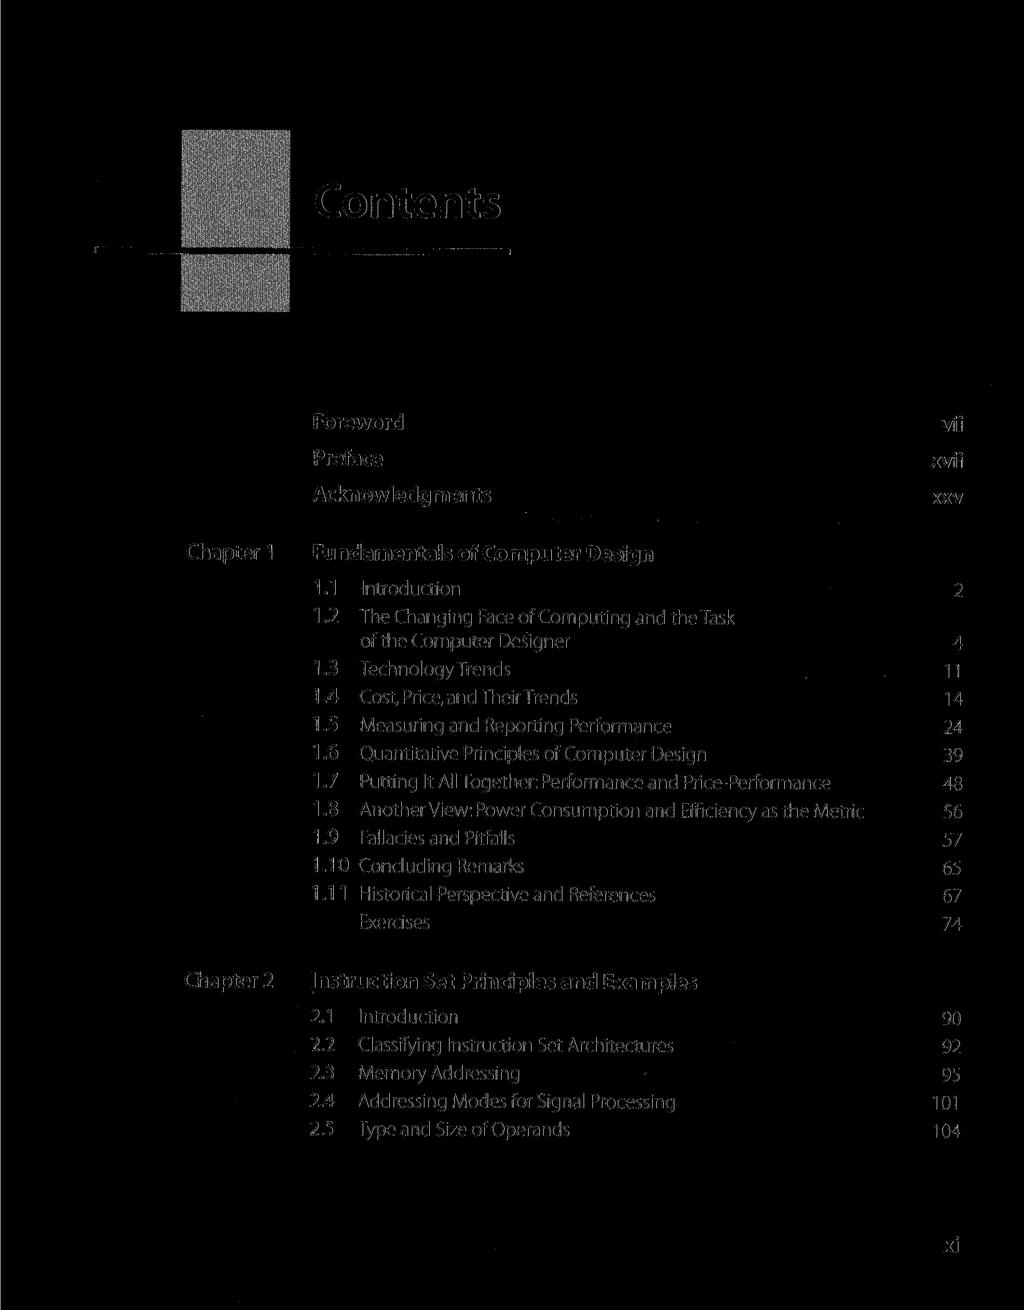 Contents Foreword Preface Acknowledgments vii xvii xxv Chapter 1 Chapter 2 Fundamentals of Computer Design 1.1 Introduction 2 1.